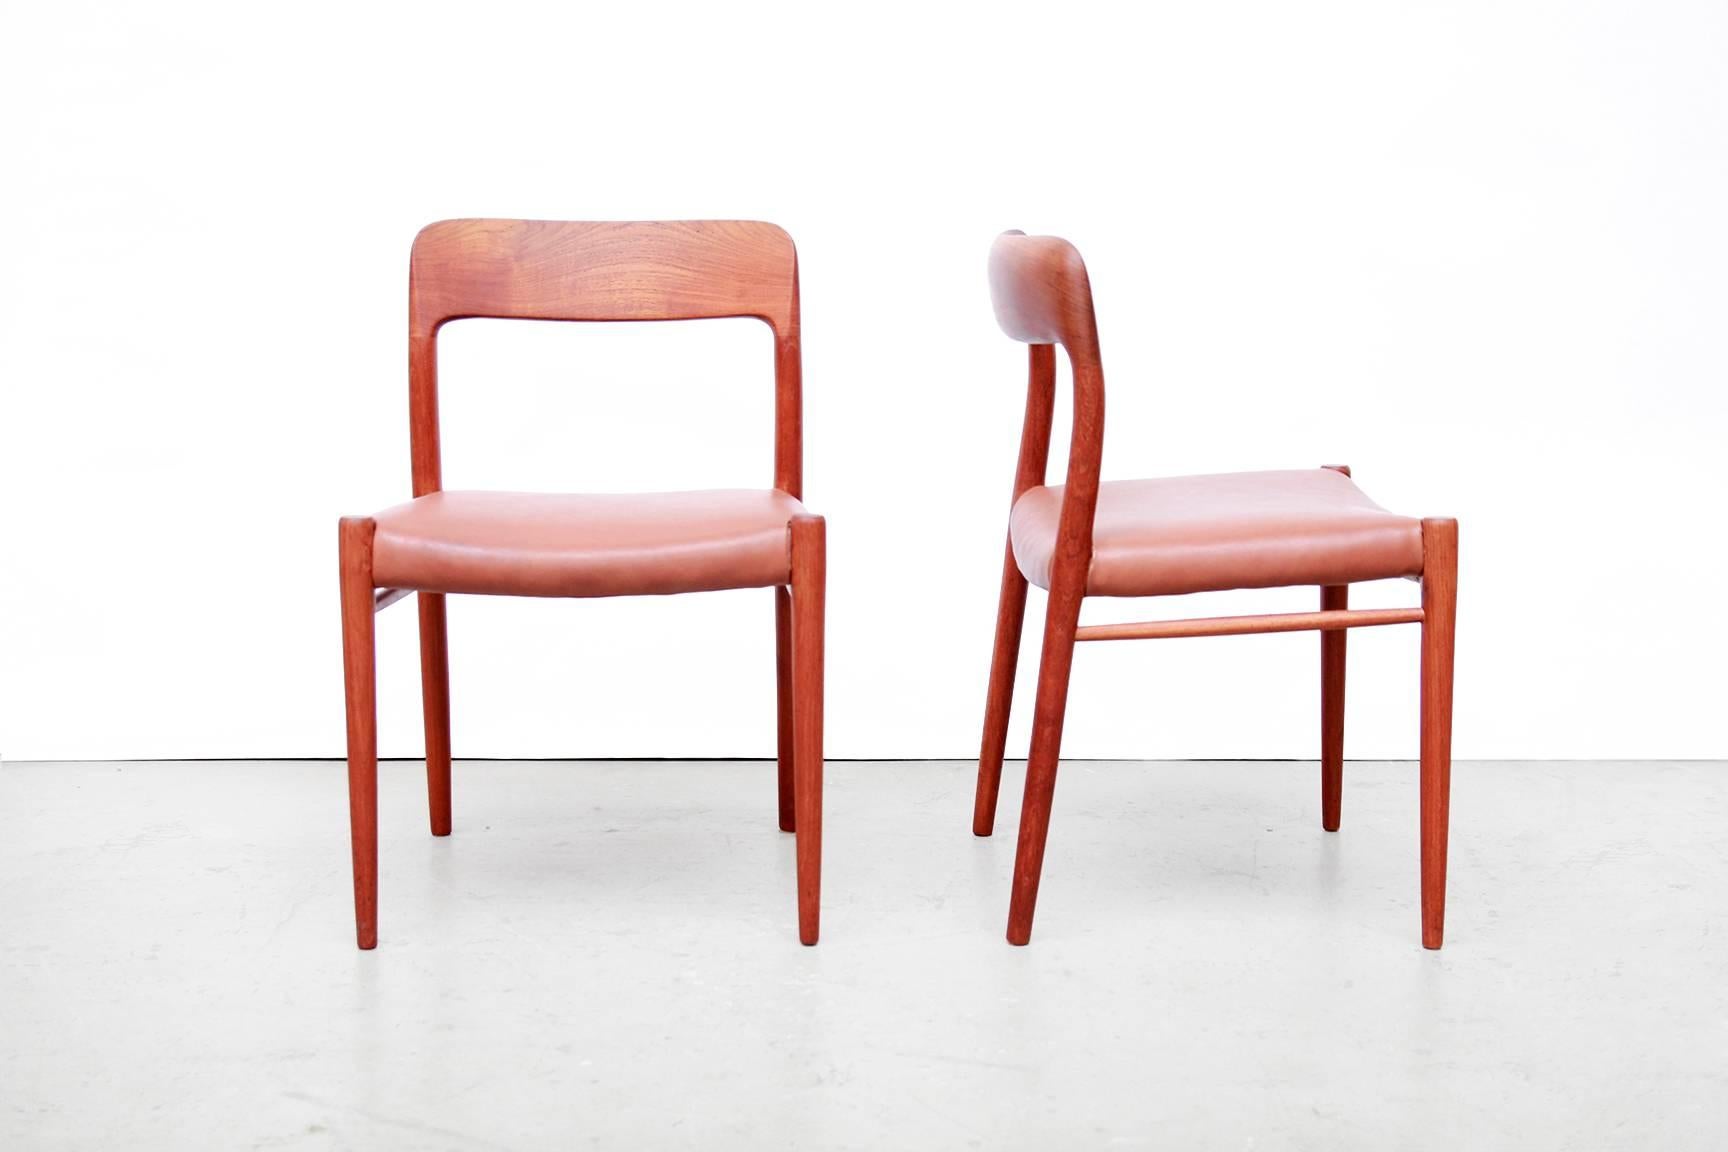 Very nice set of four dining chairs designed by Niels Møller. Niels Møller is famous in Denmark for his quality and craftsmanship and is also well-known in this model, model 75. The chairs are over 50 years old and are still in top condition. The